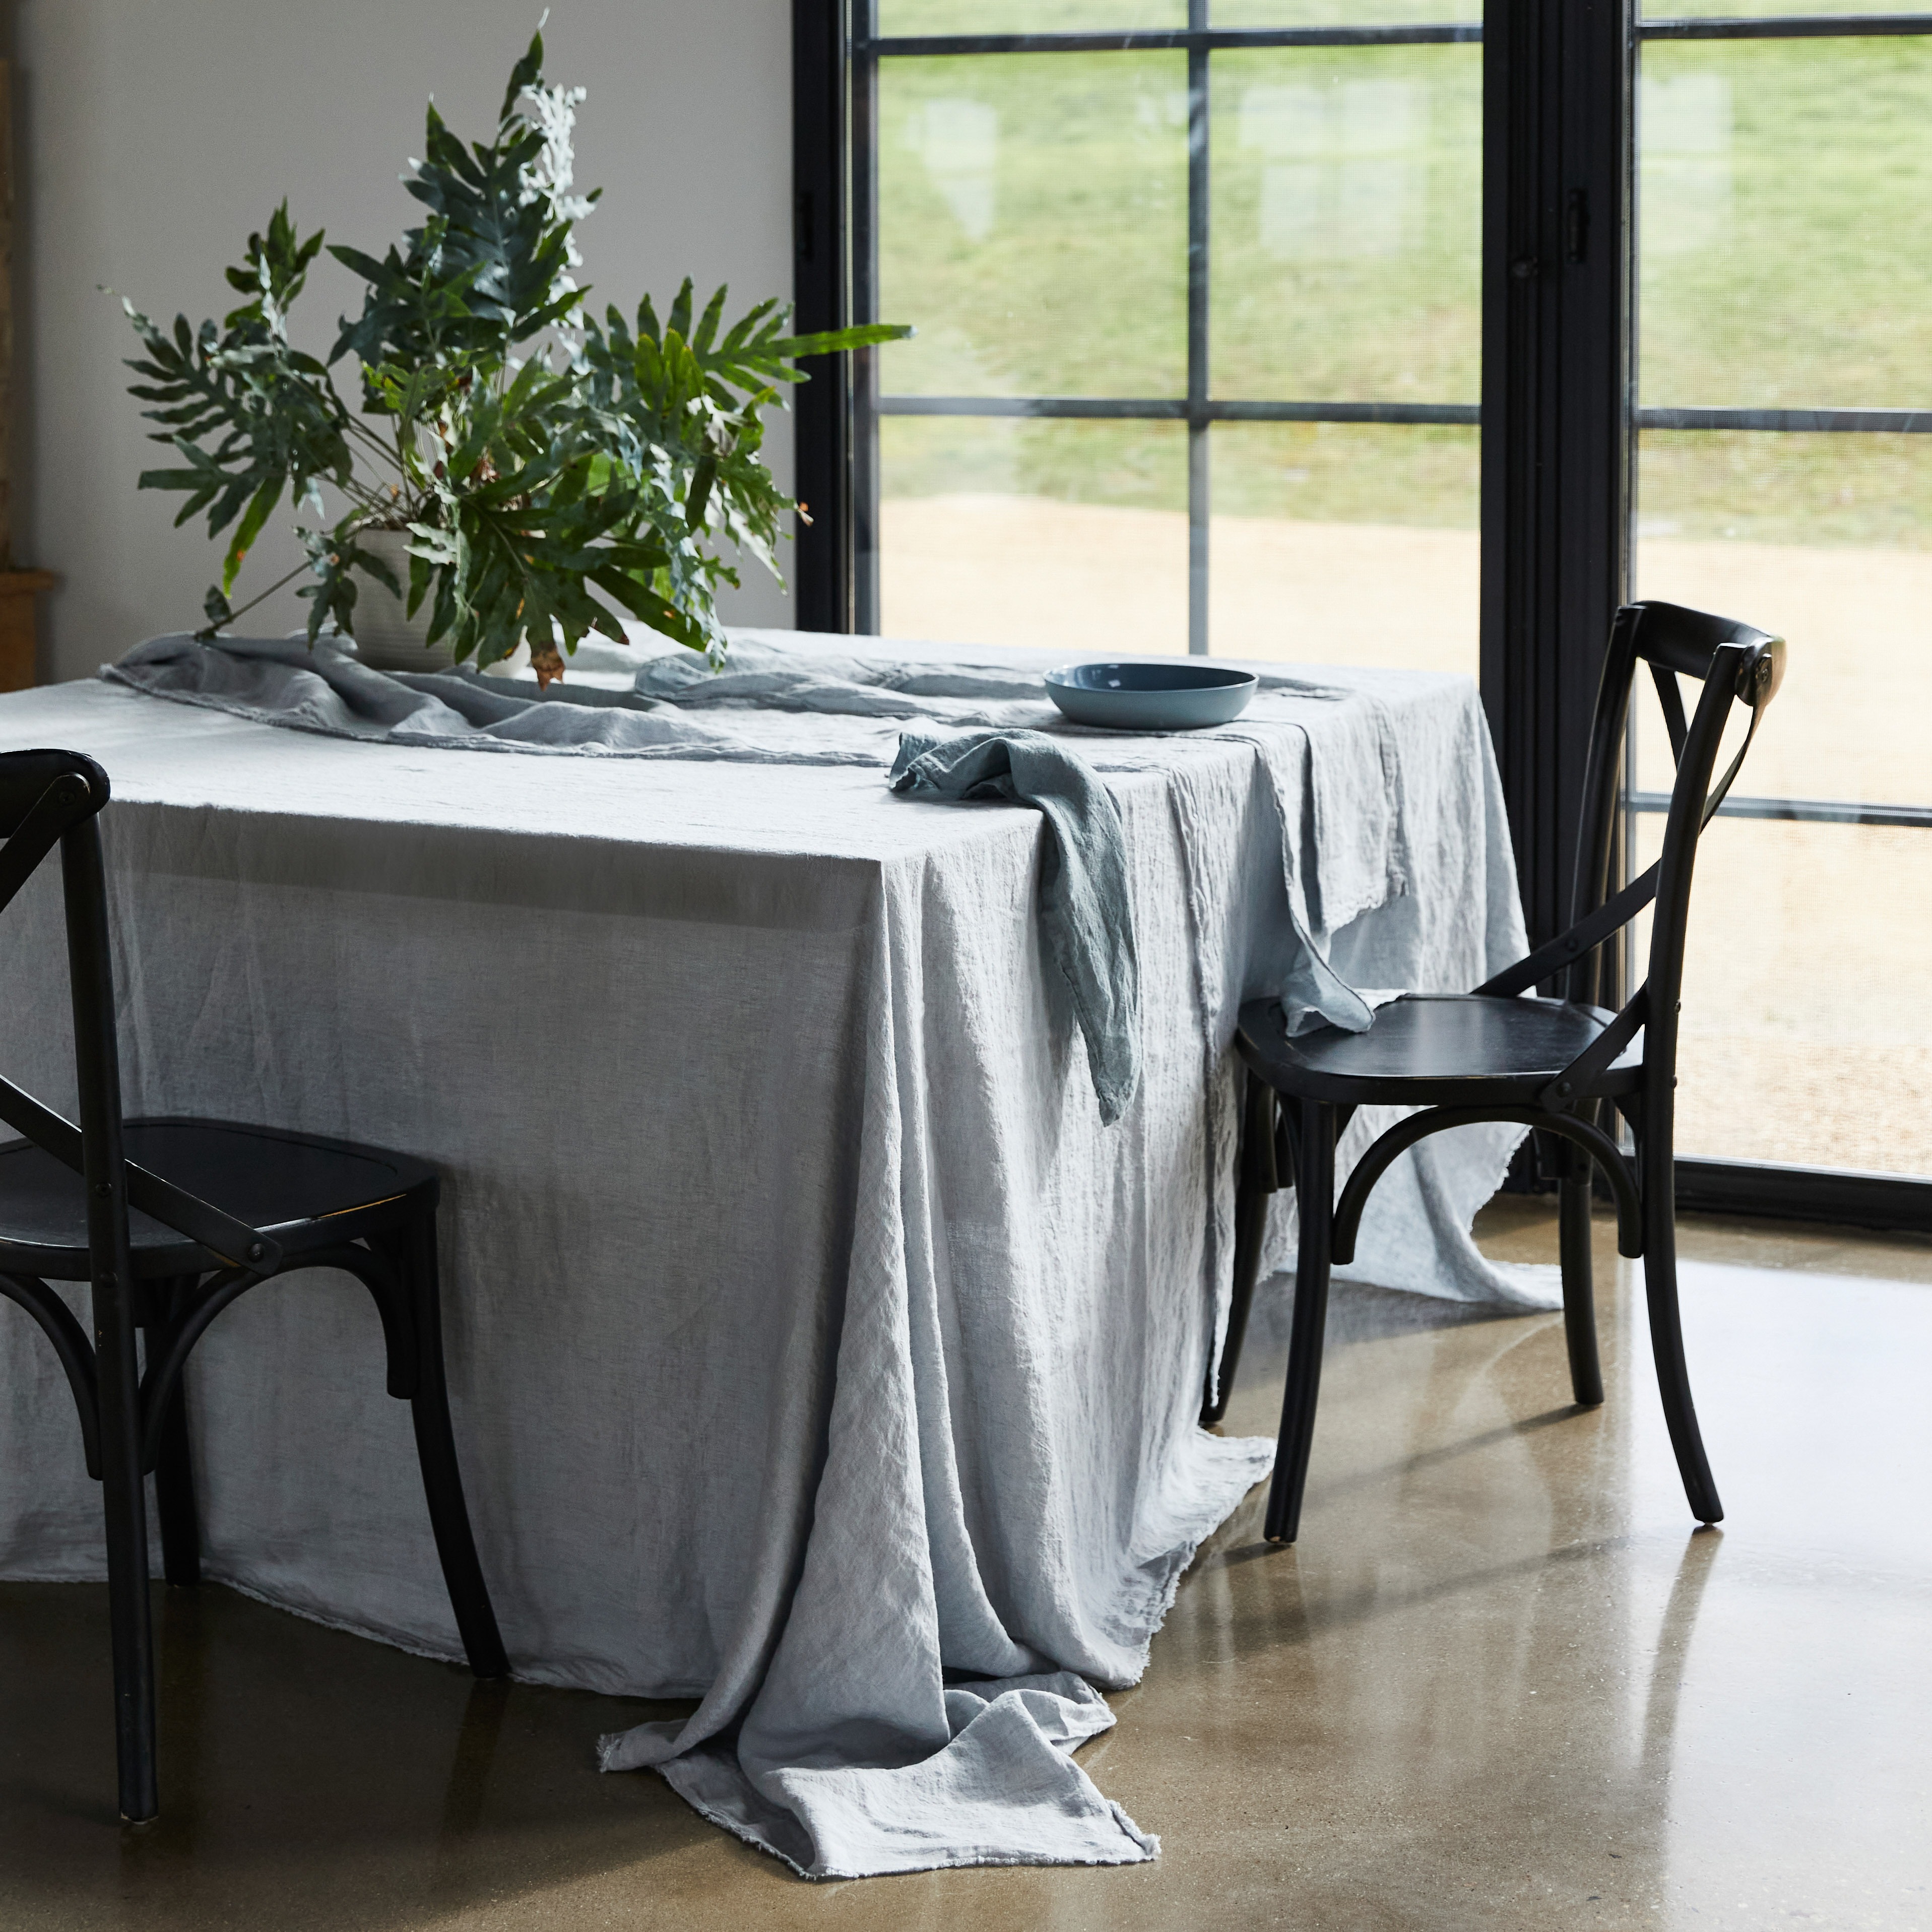 Traveler Natural Dye Tablecloth /, 100% Cotton, Size 52x53 | April Cornell | Square Tablecloths for Tablescaping